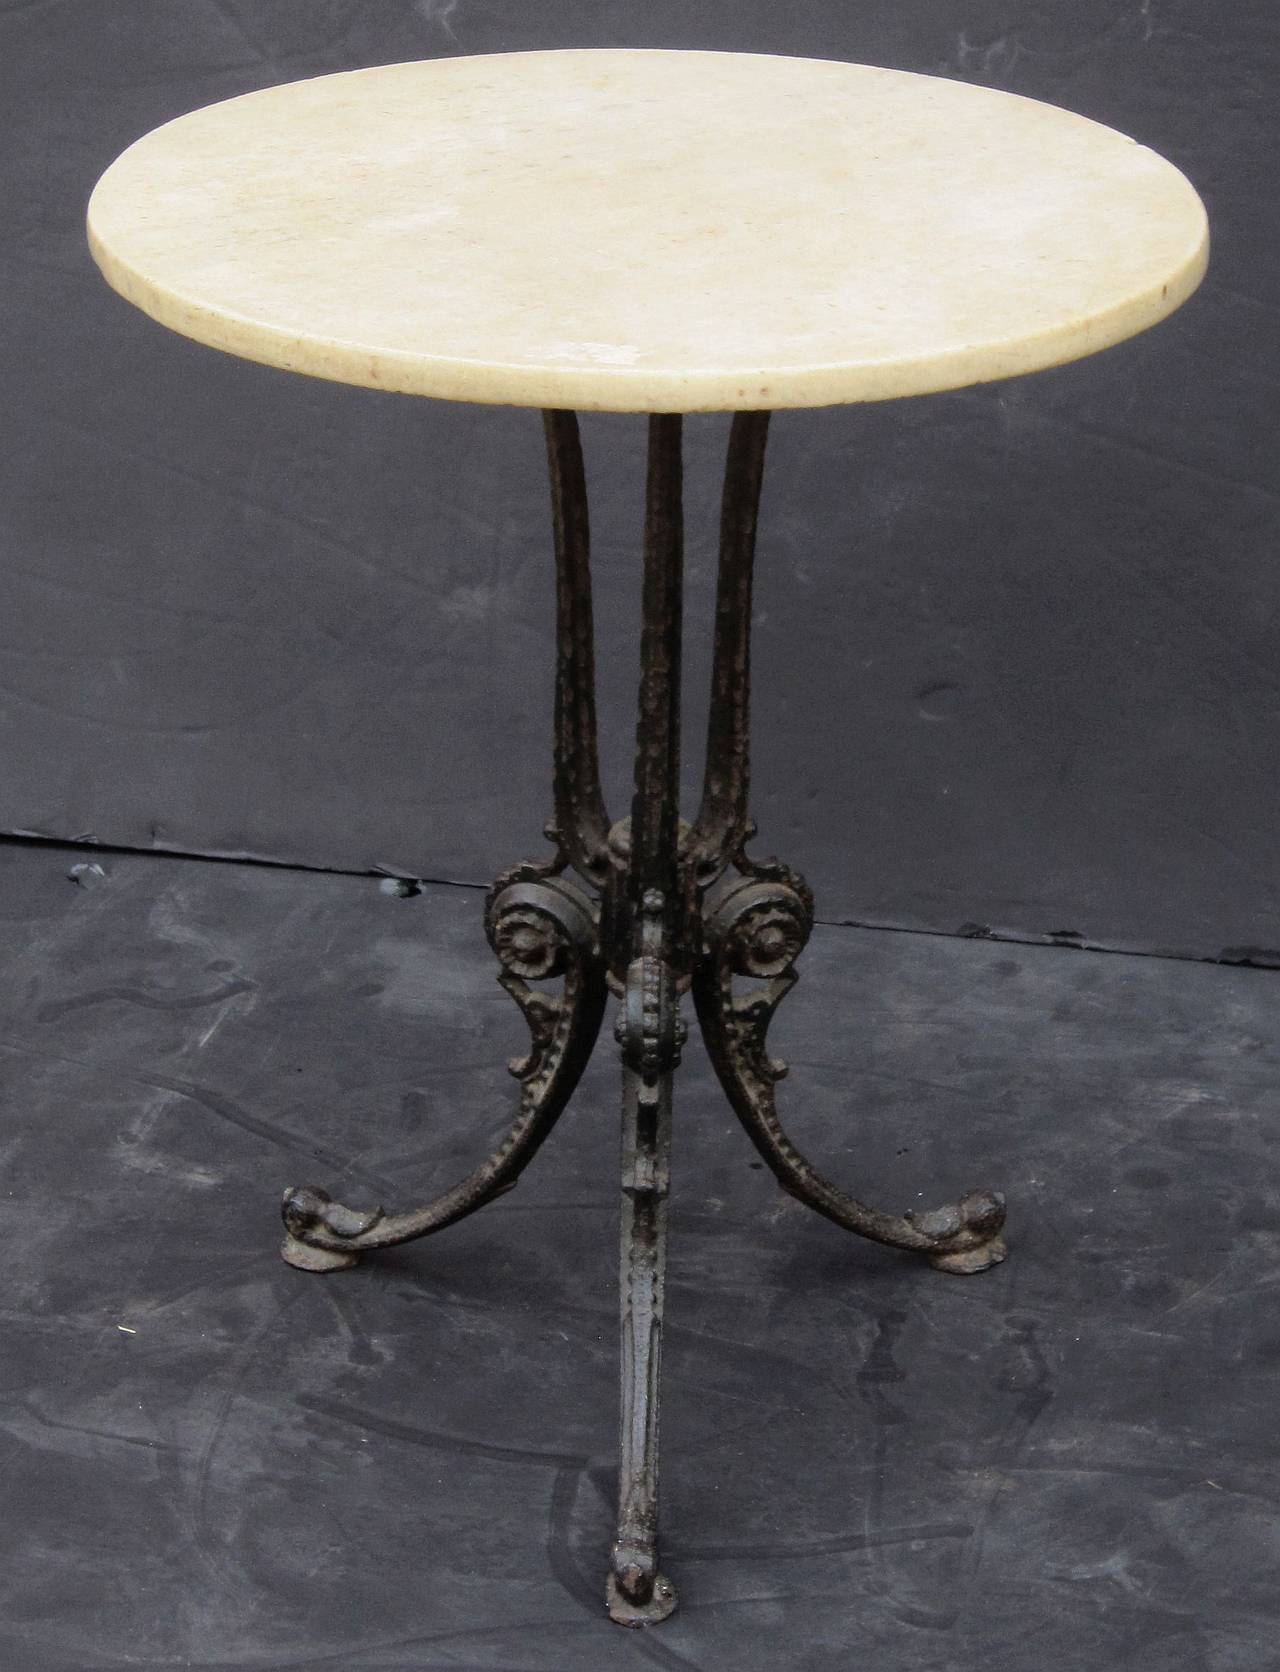 English Bistro Table with Marble Top (22 1/8